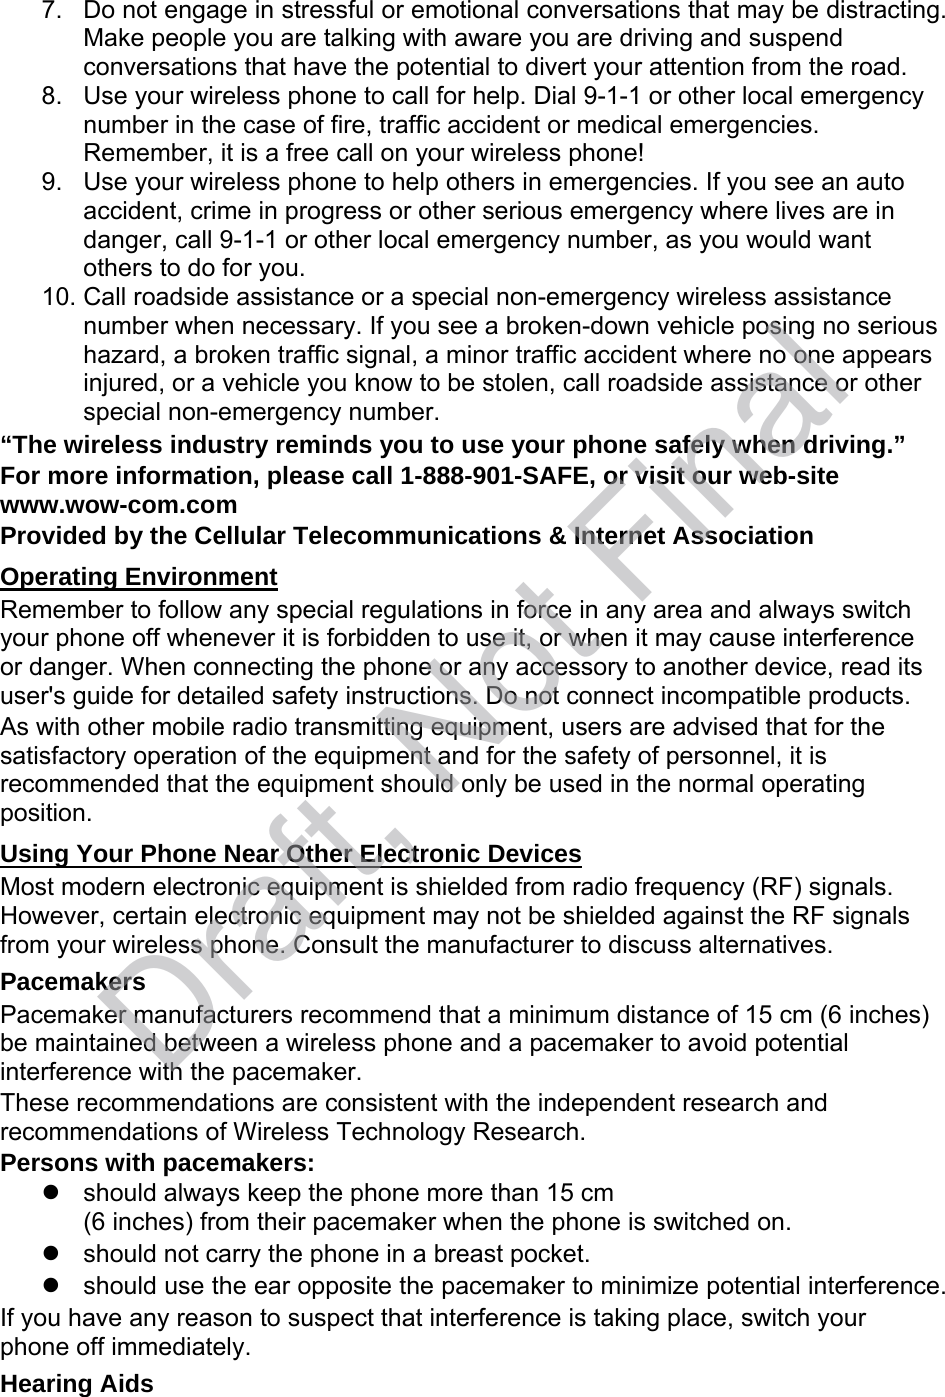 7. Do not engage in stressful or emotional conversations that may be distracting.Make people you are talking with aware you are driving and suspendconversations that have the potential to divert your attention from the road.8. Use your wireless phone to call for help. Dial 9-1-1 or other local emergencynumber in the case of fire, traffic accident or medical emergencies.Remember, it is a free call on your wireless phone!9. Use your wireless phone to help others in emergencies. If you see an autoaccident, crime in progress or other serious emergency where lives are indanger, call 9-1-1 or other local emergency number, as you would wantothers to do for you.10. Call roadside assistance or a special non-emergency wireless assistancenumber when necessary. If you see a broken-down vehicle posing no serioushazard, a broken traffic signal, a minor traffic accident where no one appearsinjured, or a vehicle you know to be stolen, call roadside assistance or otherspecial non-emergency number.“The wireless industry reminds you to use your phone safely when driving.” For more information, please call 1-888-901-SAFE, or visit our web-site www.wow-com.com Provided by the Cellular Telecommunications &amp; Internet Association Operating Environment Remember to follow any special regulations in force in any area and always switch your phone off whenever it is forbidden to use it, or when it may cause interference or danger. When connecting the phone or any accessory to another device, read its user&apos;s guide for detailed safety instructions. Do not connect incompatible products. As with other mobile radio transmitting equipment, users are advised that for the satisfactory operation of the equipment and for the safety of personnel, it is recommended that the equipment should only be used in the normal operating position. Using Your Phone Near Other Electronic Devices Most modern electronic equipment is shielded from radio frequency (RF) signals. However, certain electronic equipment may not be shielded against the RF signals from your wireless phone. Consult the manufacturer to discuss alternatives. Pacemakers Pacemaker manufacturers recommend that a minimum distance of 15 cm (6 inches) be maintained between a wireless phone and a pacemaker to avoid potential interference with the pacemaker. These recommendations are consistent with the independent research and recommendations of Wireless Technology Research. Persons with pacemakers: should always keep the phone more than 15 cm(6 inches) from their pacemaker when the phone is switched on.should not carry the phone in a breast pocket.should use the ear opposite the pacemaker to minimize potential interference.If you have any reason to suspect that interference is taking place, switch your phone off immediately. Hearing Aids Draft, Not Final